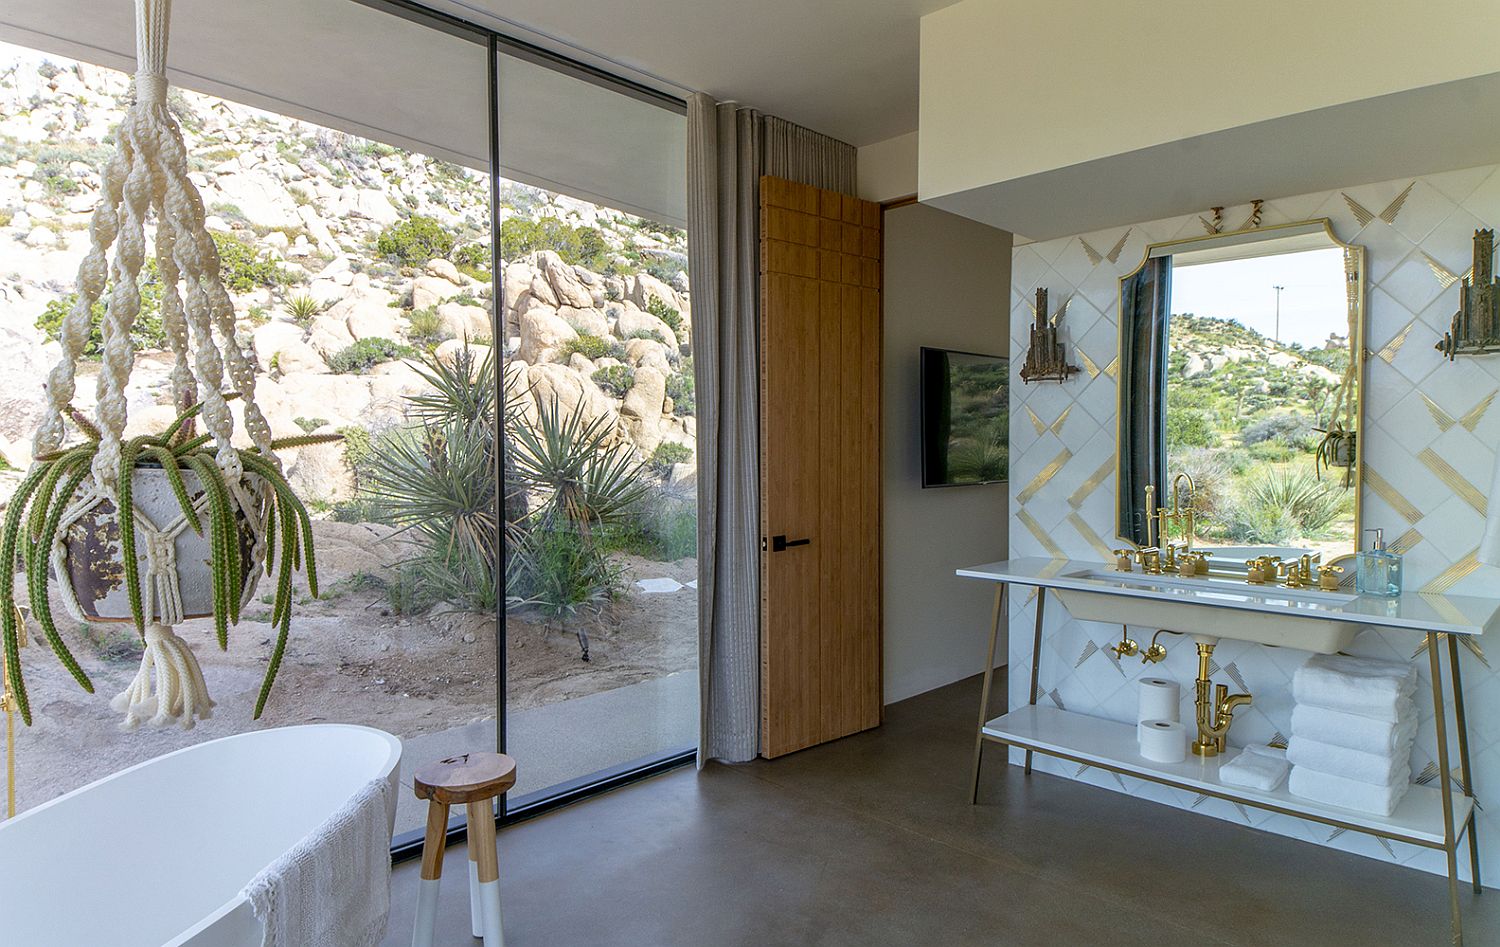 Contemporary bathroom with a view of the landscape around it